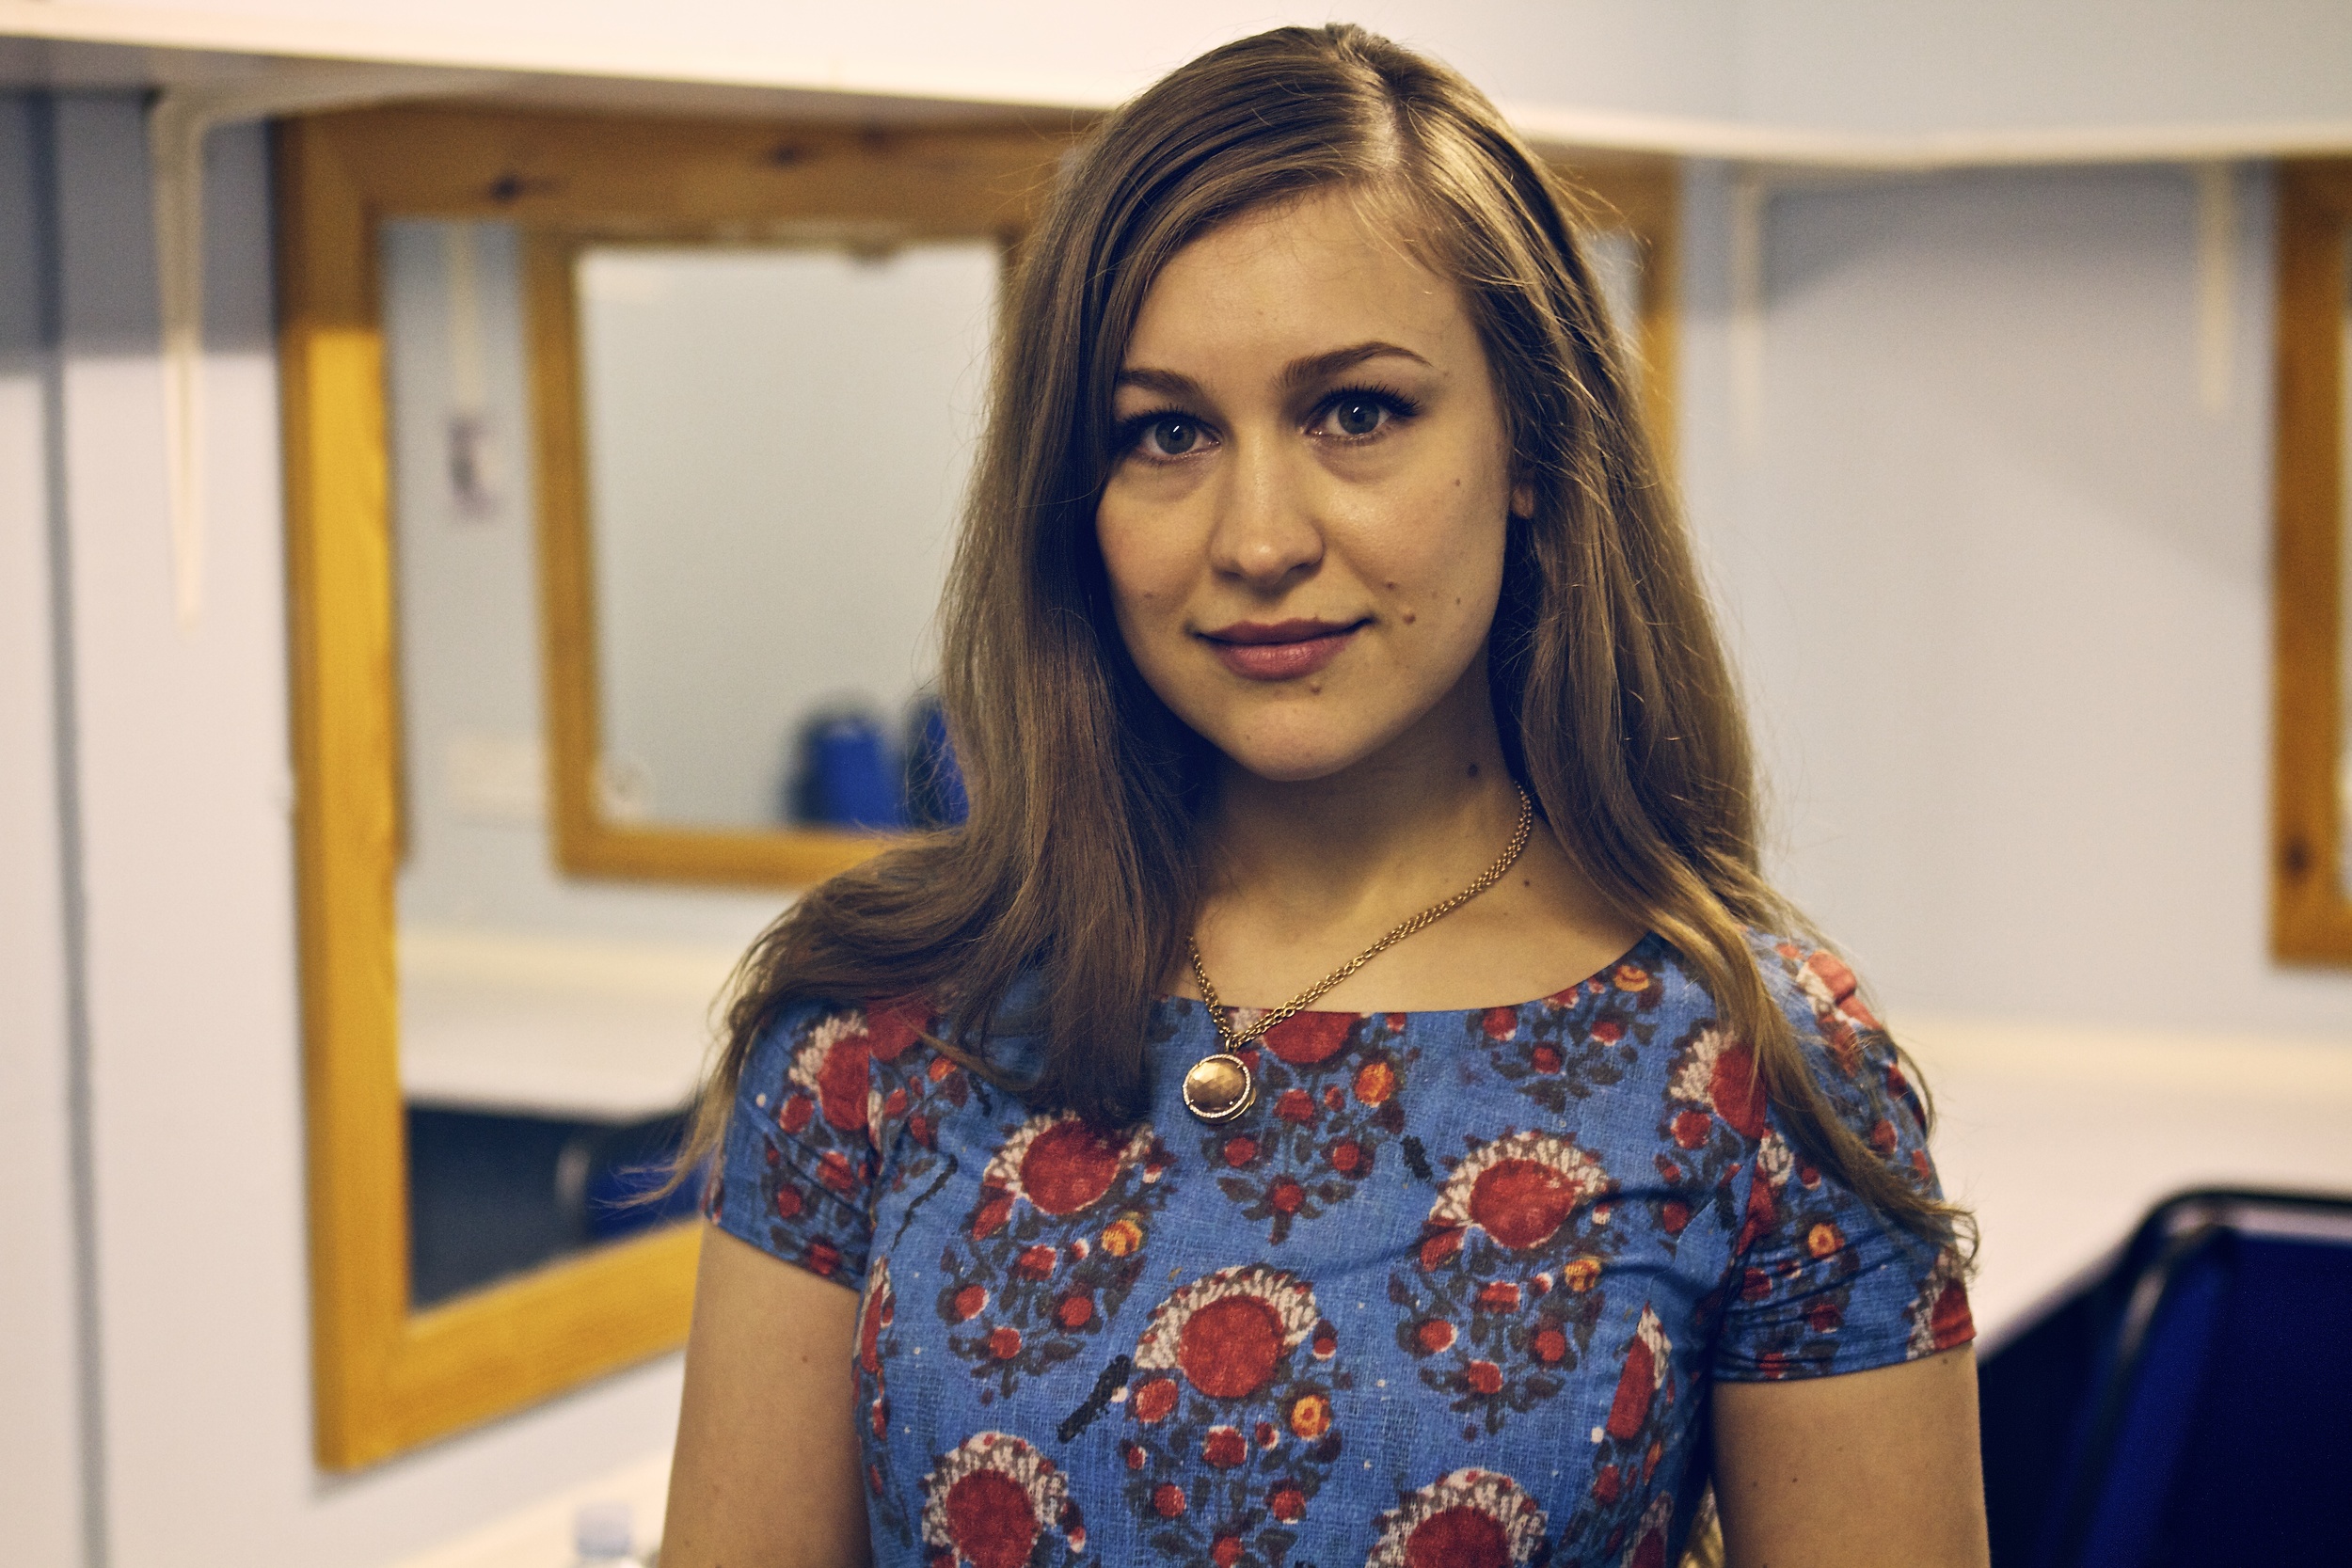 Joanna Newsom, backstage after her second show at ATP. Worth the trip for this photo alone..jpg